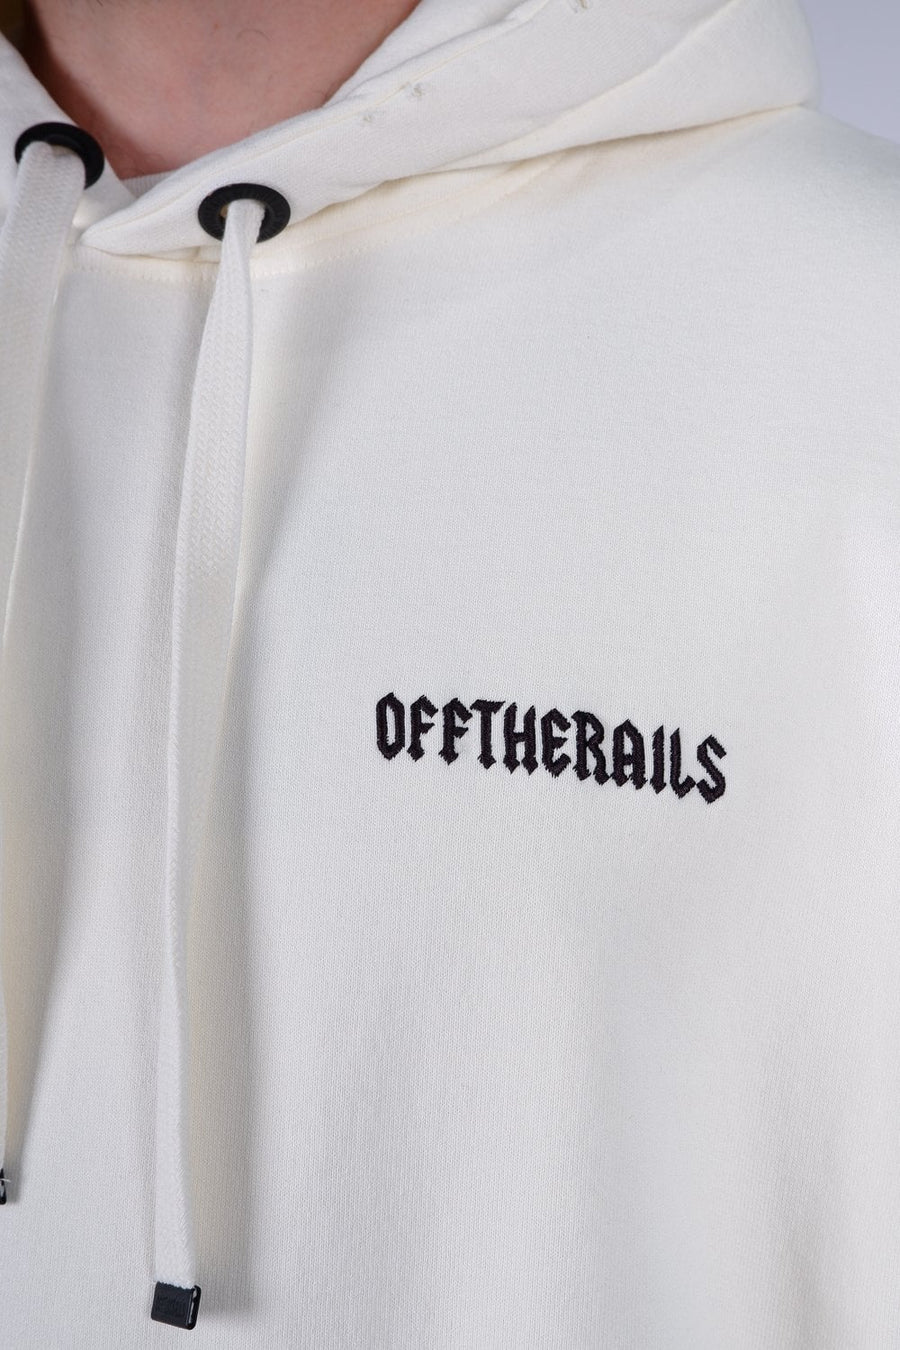 Buy the Off The Rails Snaked Hoodie in Off White at Intro. Spend £50 for free UK delivery. Official stockists. We ship worldwide.